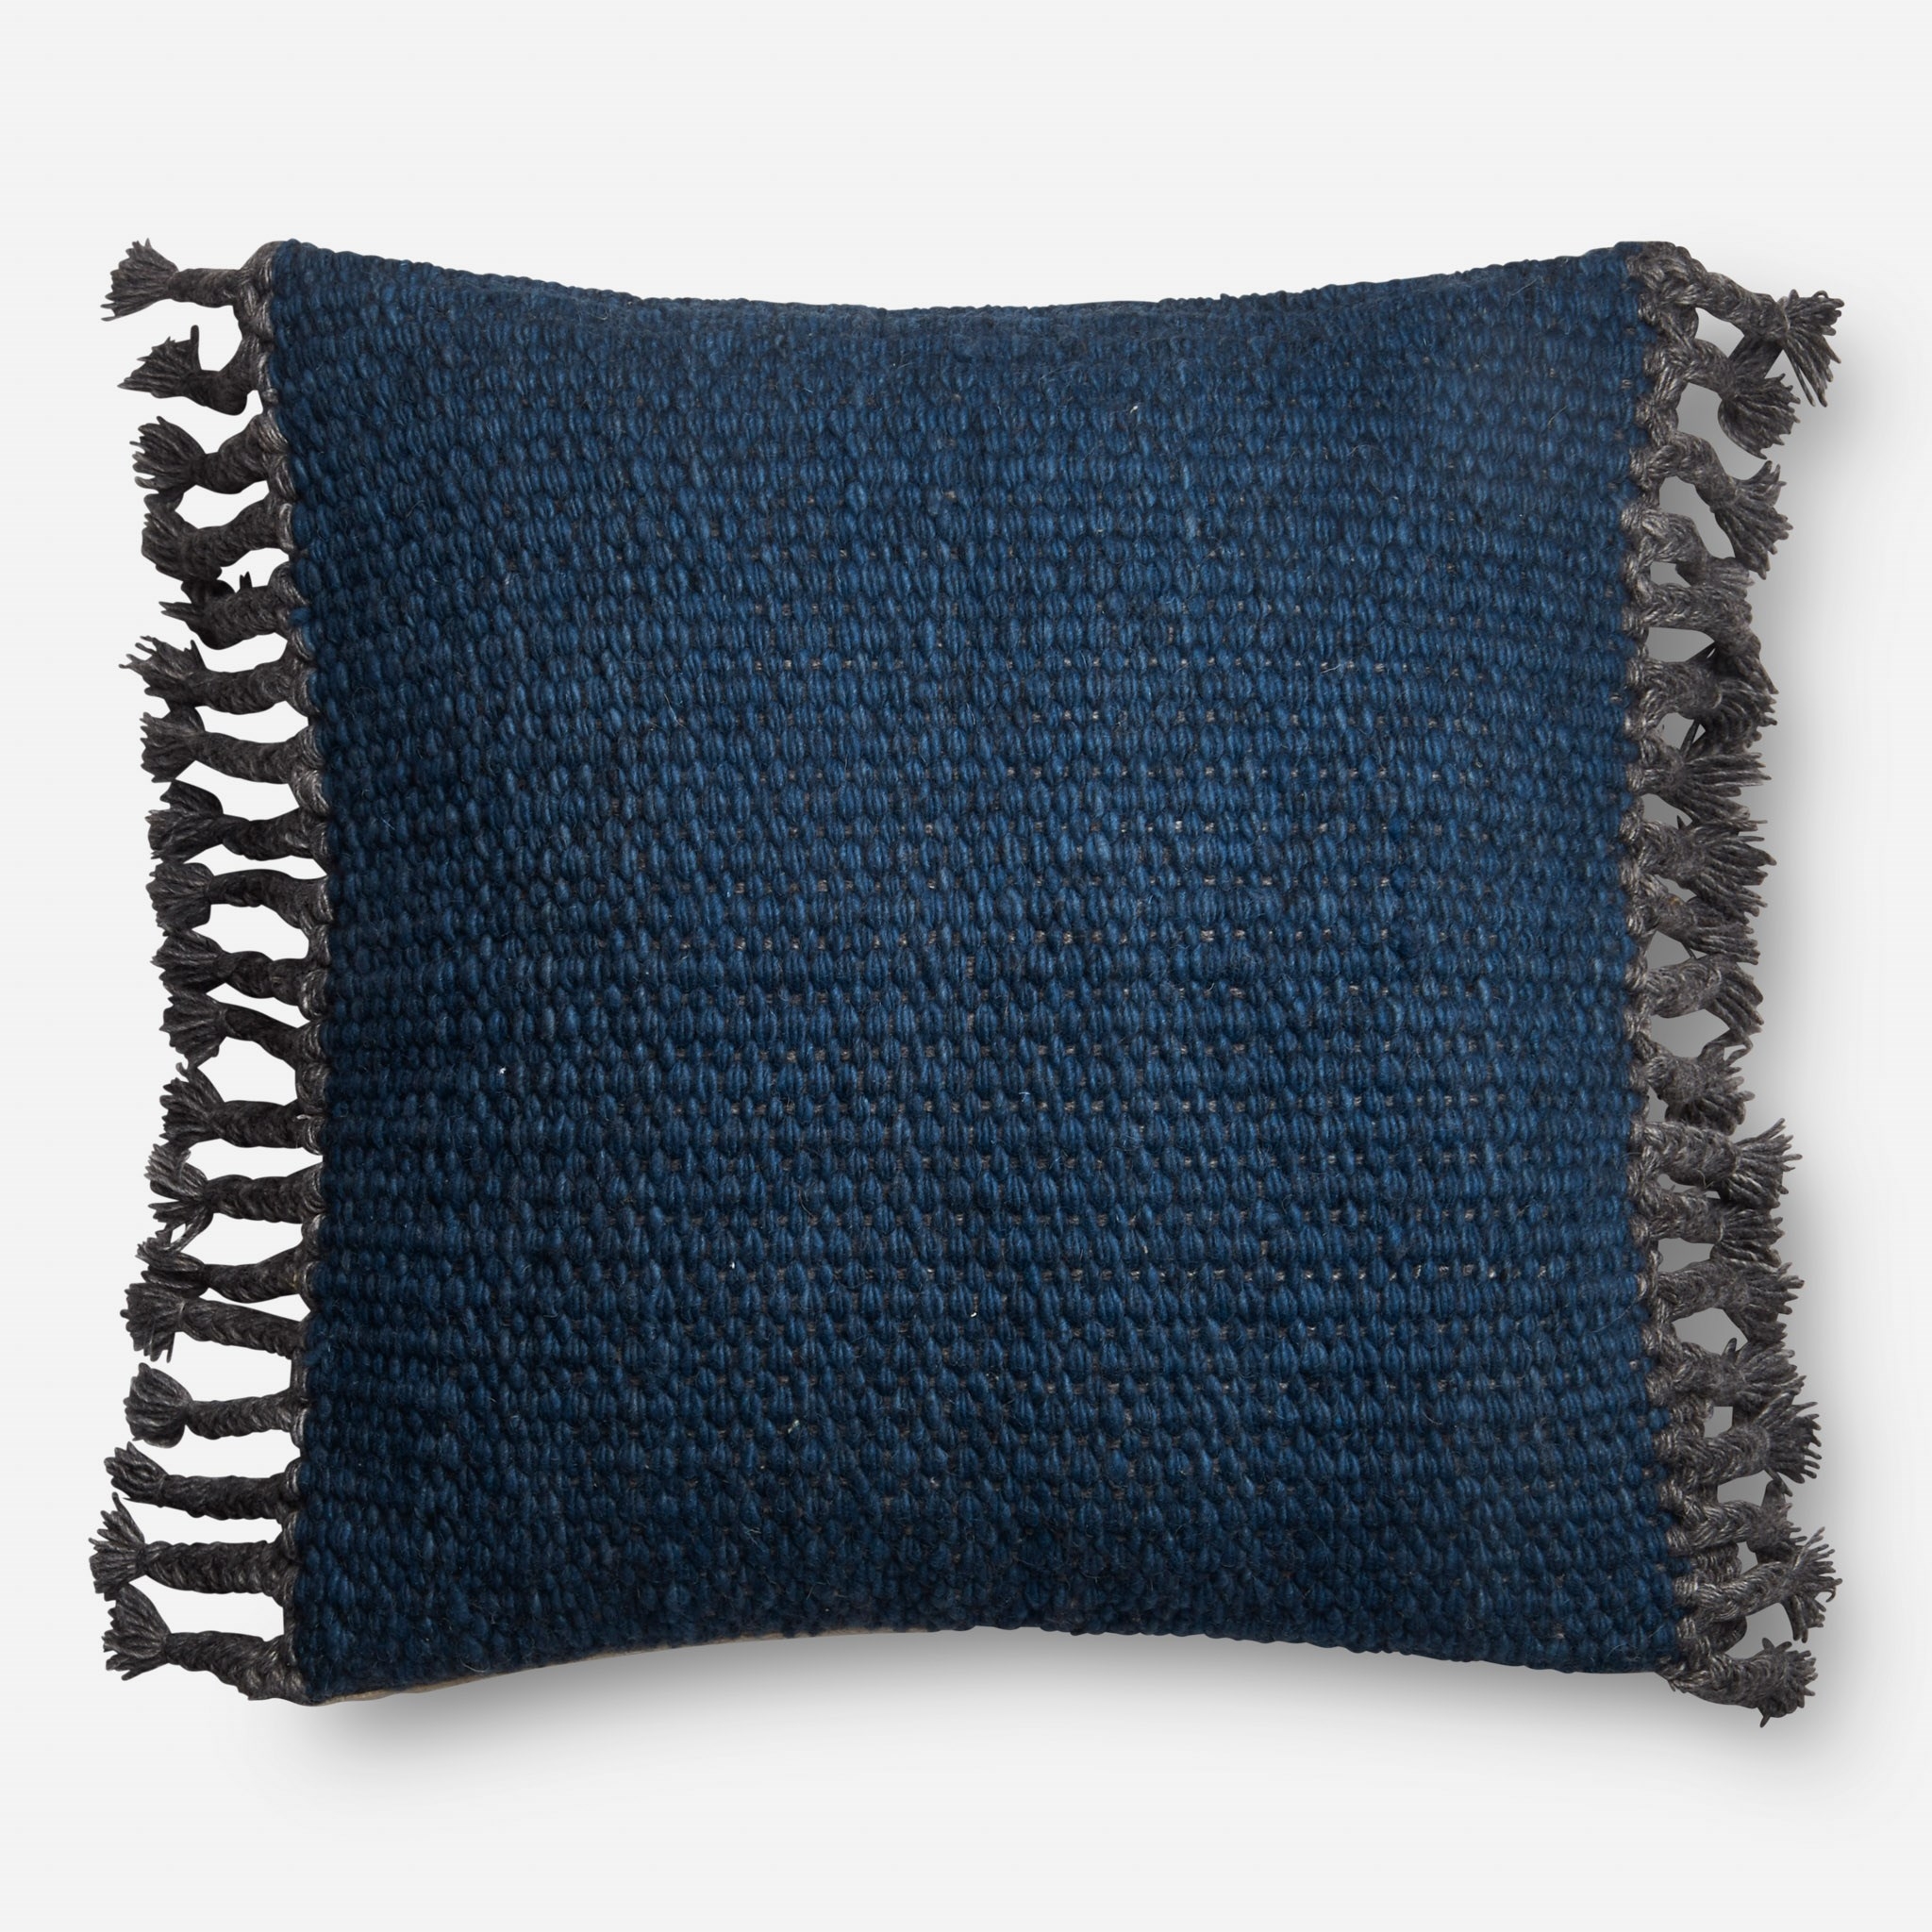 Tassel Throw Pillow with Down Fill, Navy, 22" x 22" - Image 0